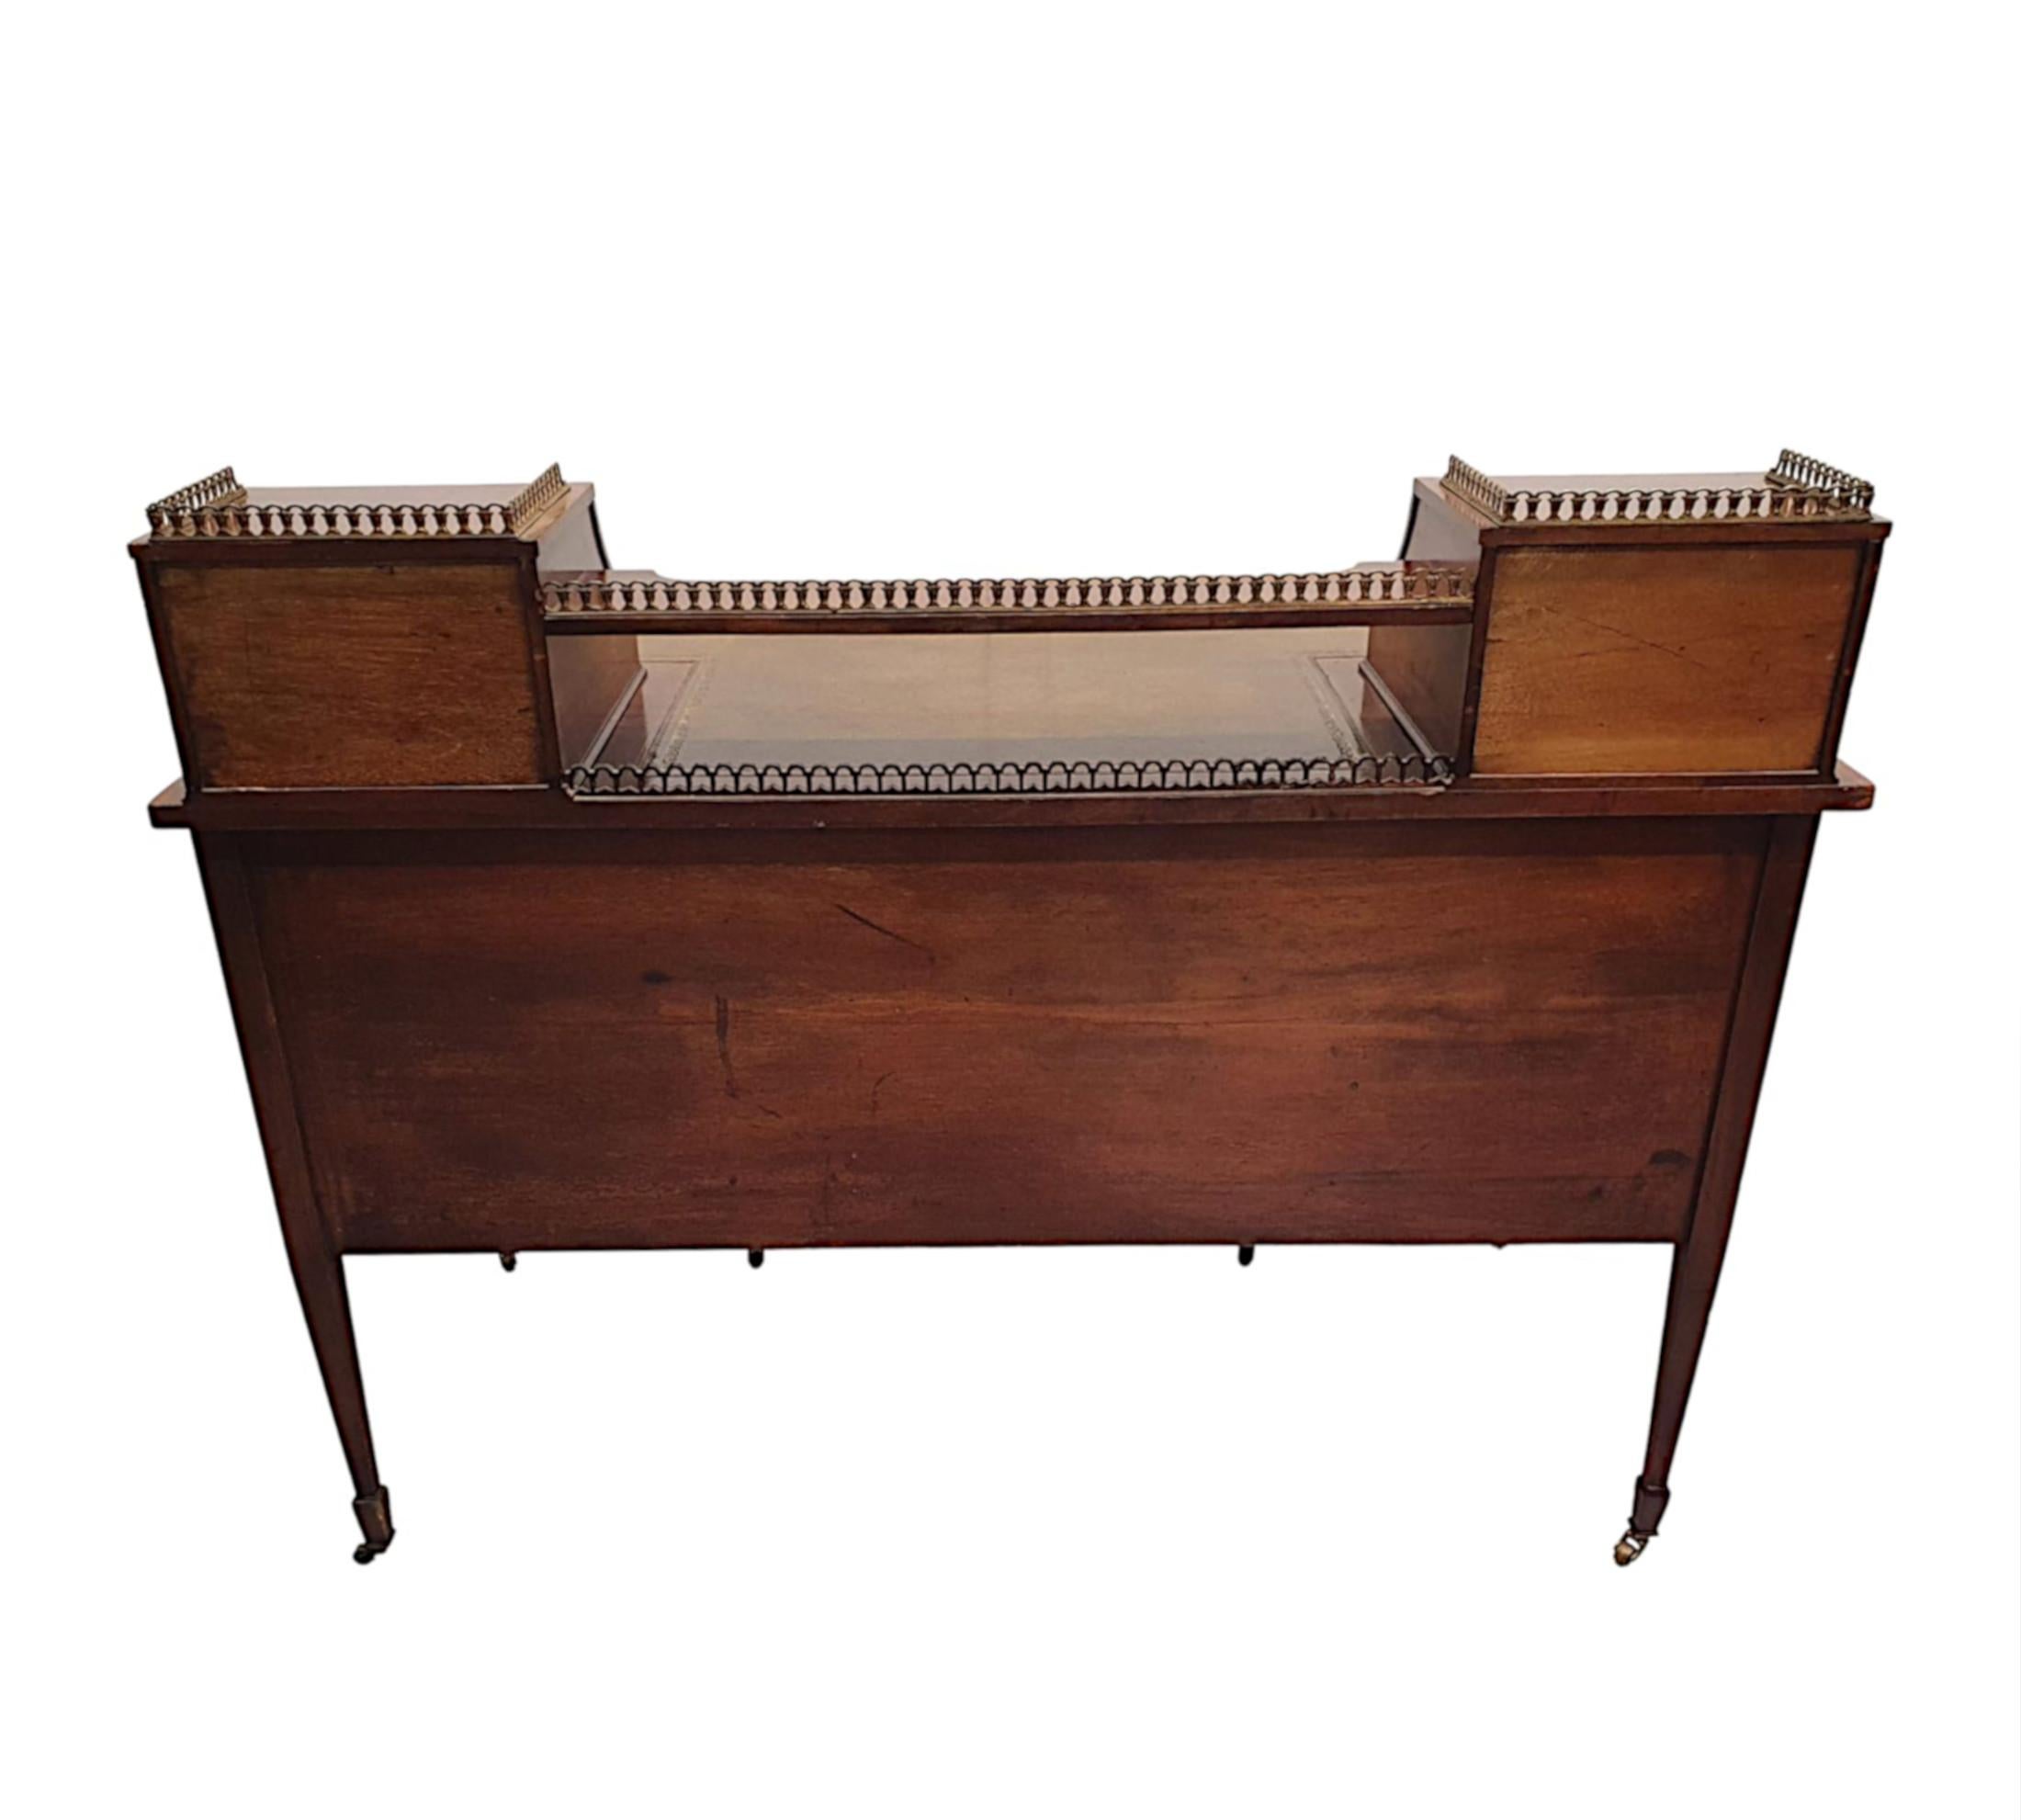 A Stunning Edwardian Desk in the Carlton House Style by Maple of London For Sale 1